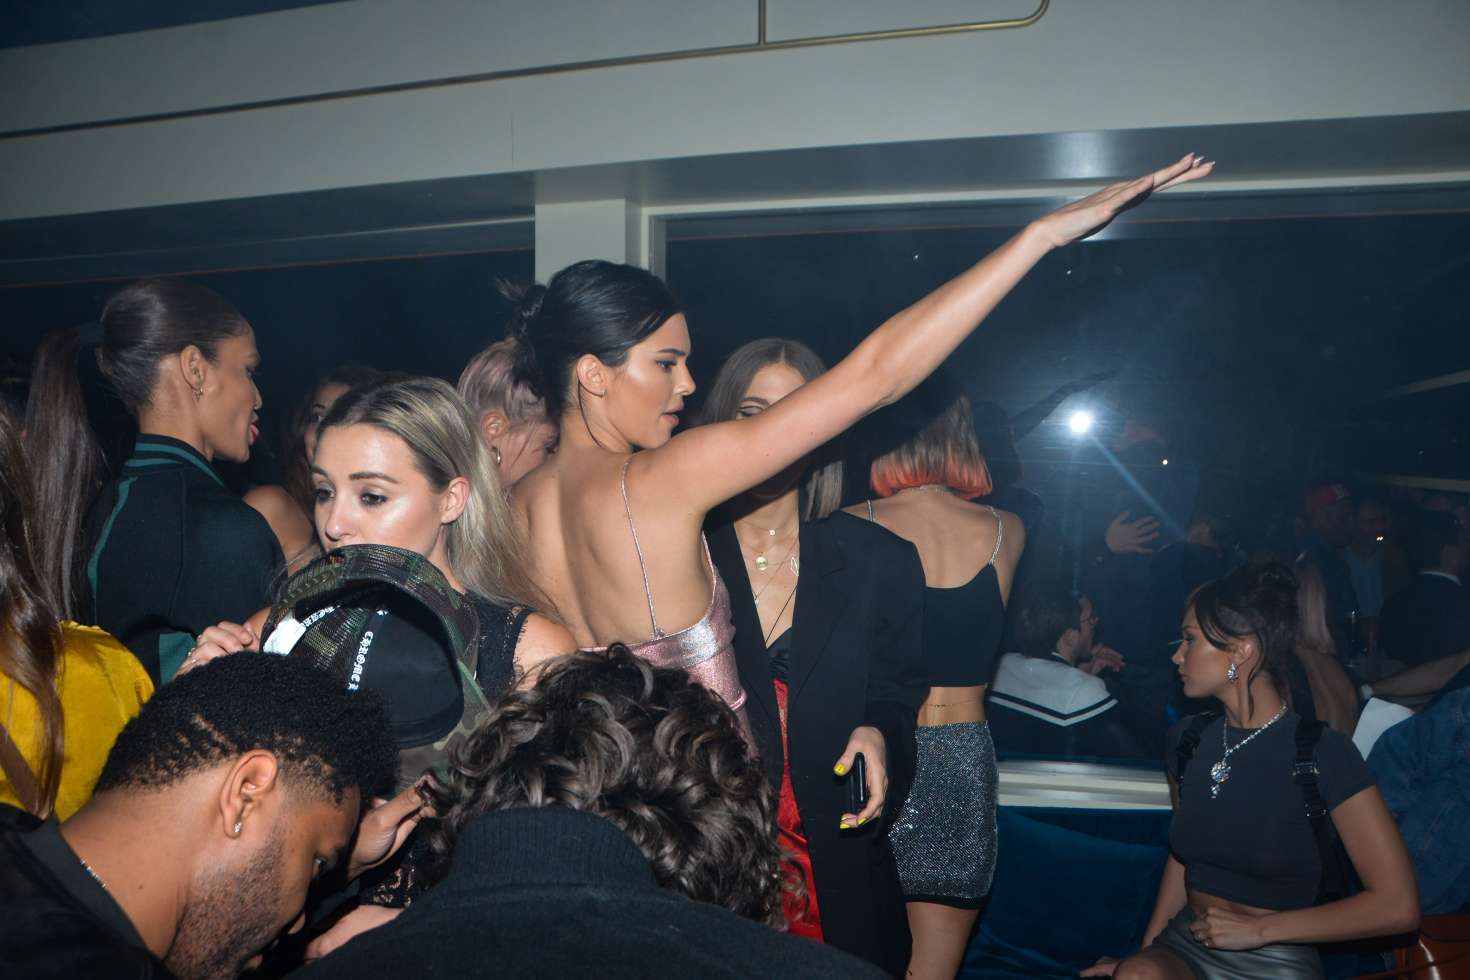 Hailey Baldwin â€“ Arrives at a Magnum party in Cannes